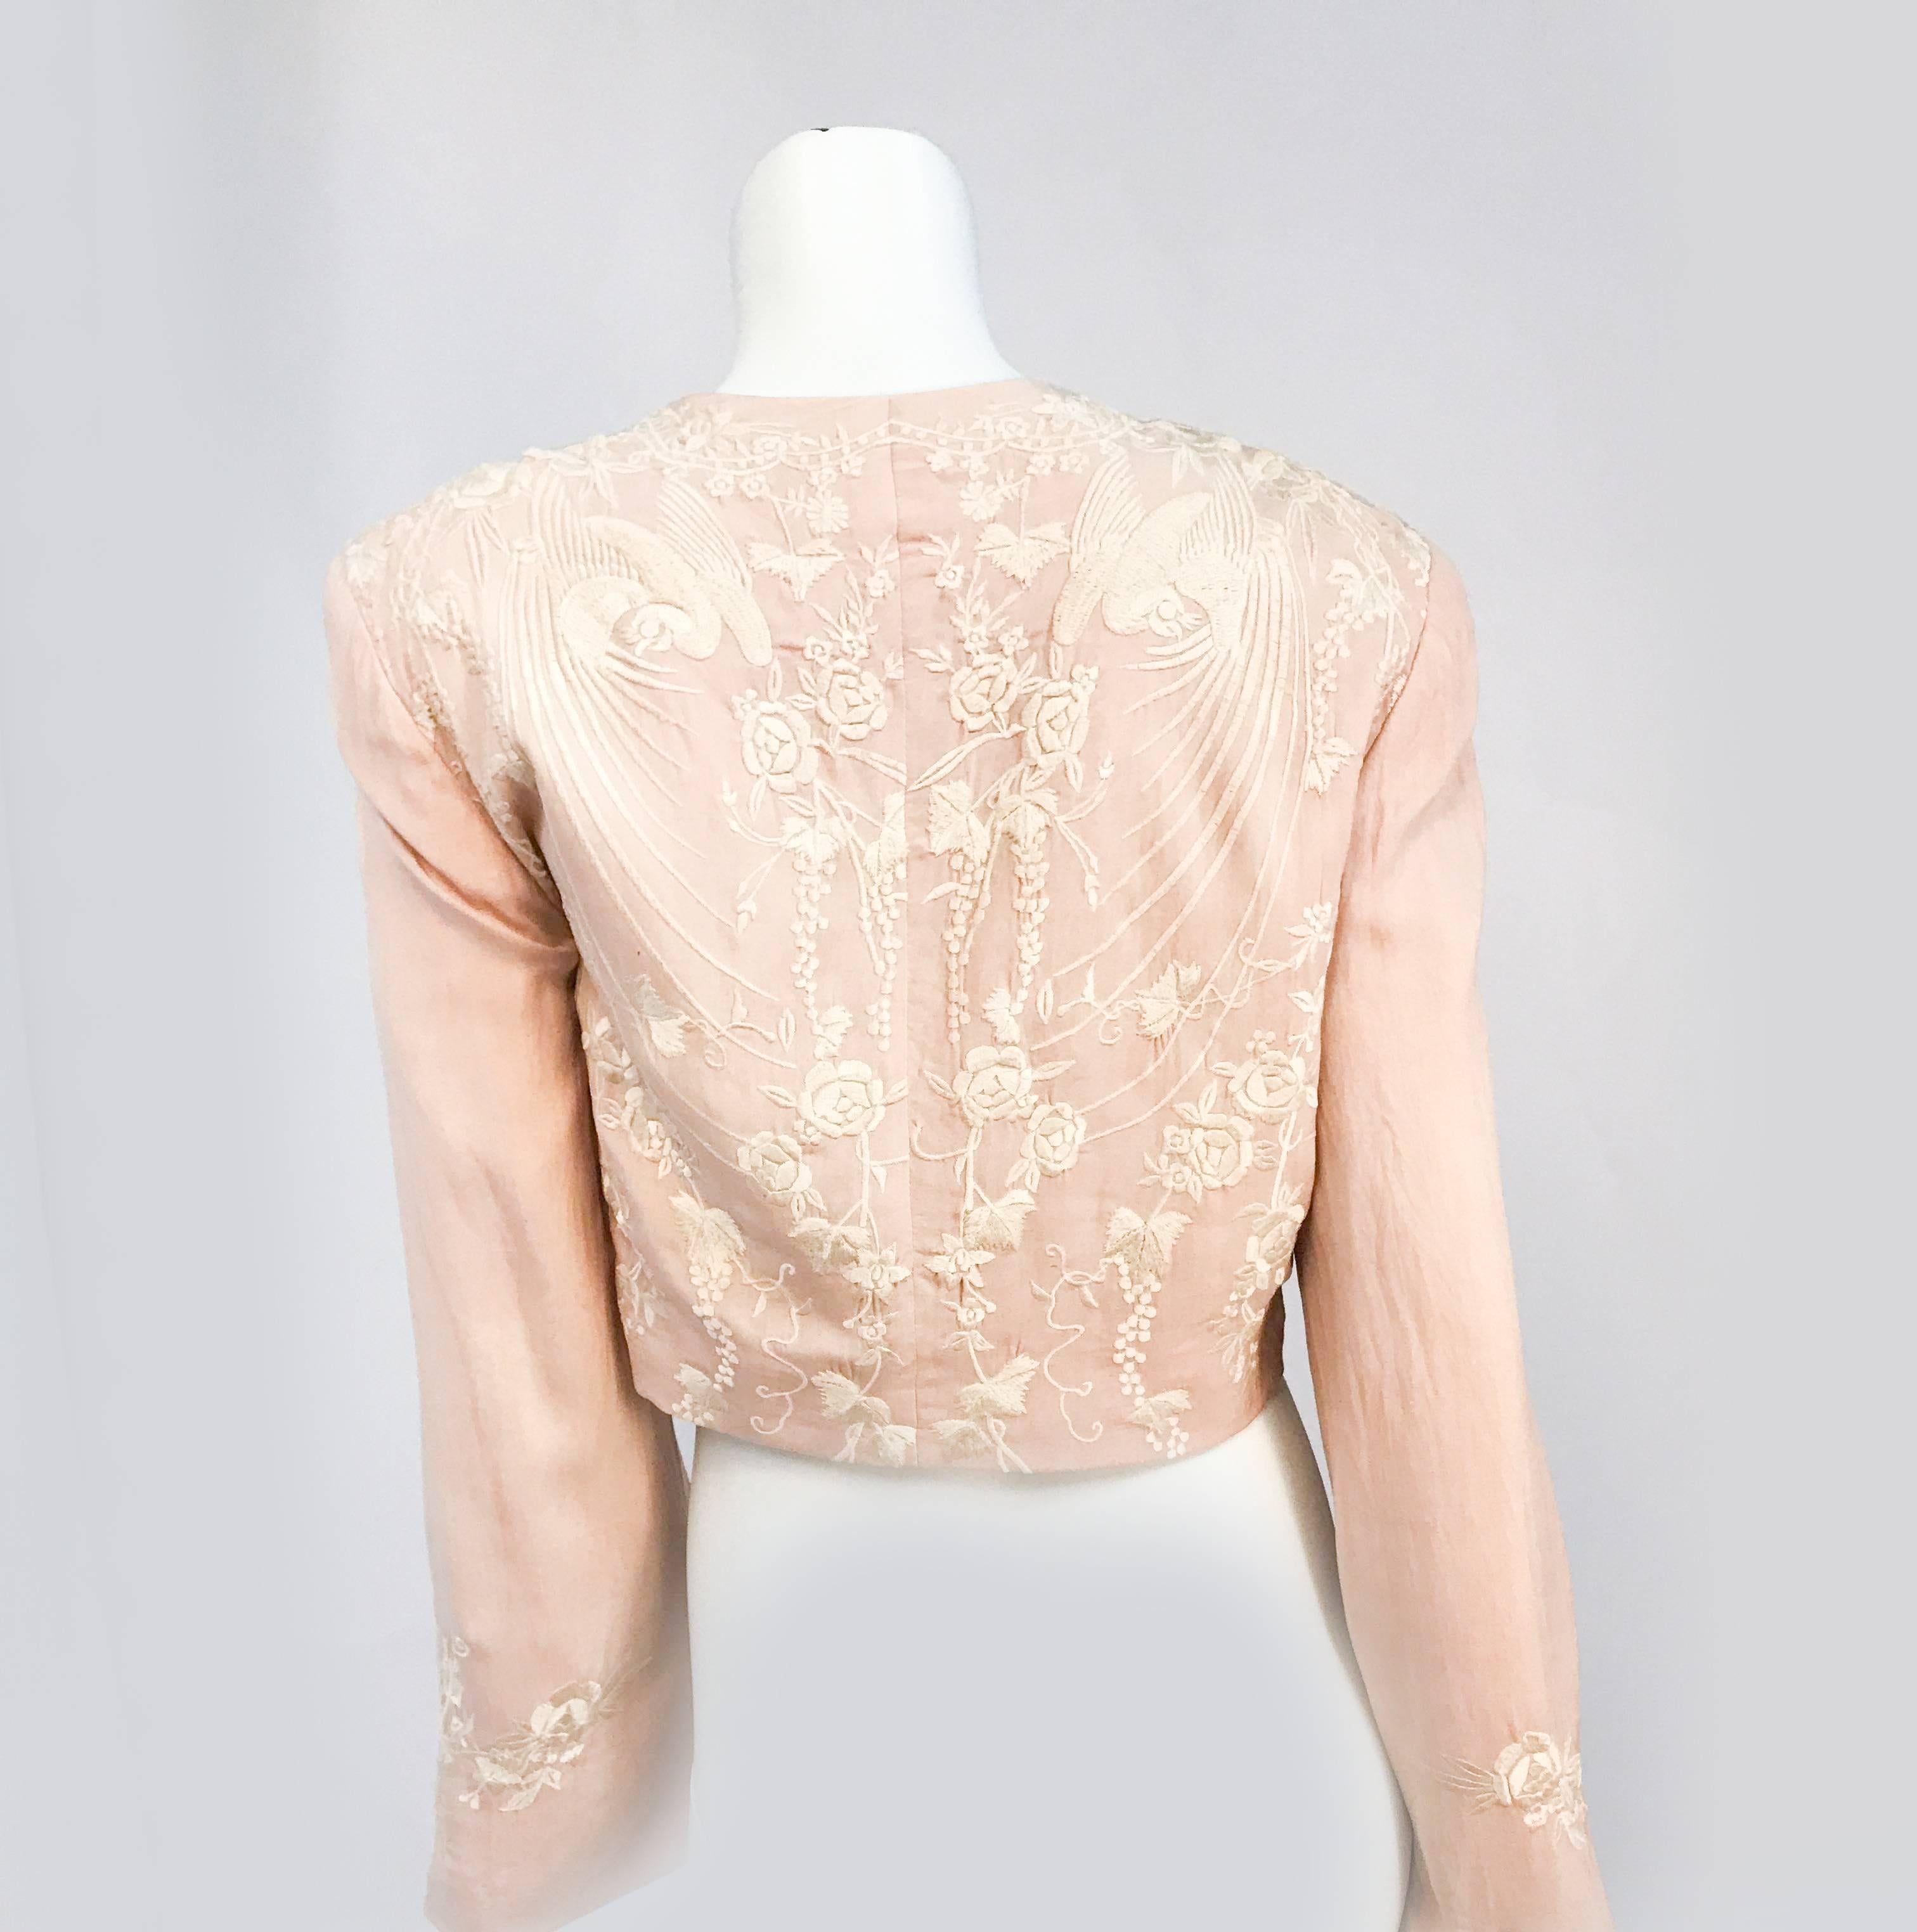 1980s Pale Rose Silk Embroidered Bolero. Pale rose silk bolero with machine embroidery along the face of the garment and the sleeves. Sleeves have a slight bell shape to them and the shoulders are padded.